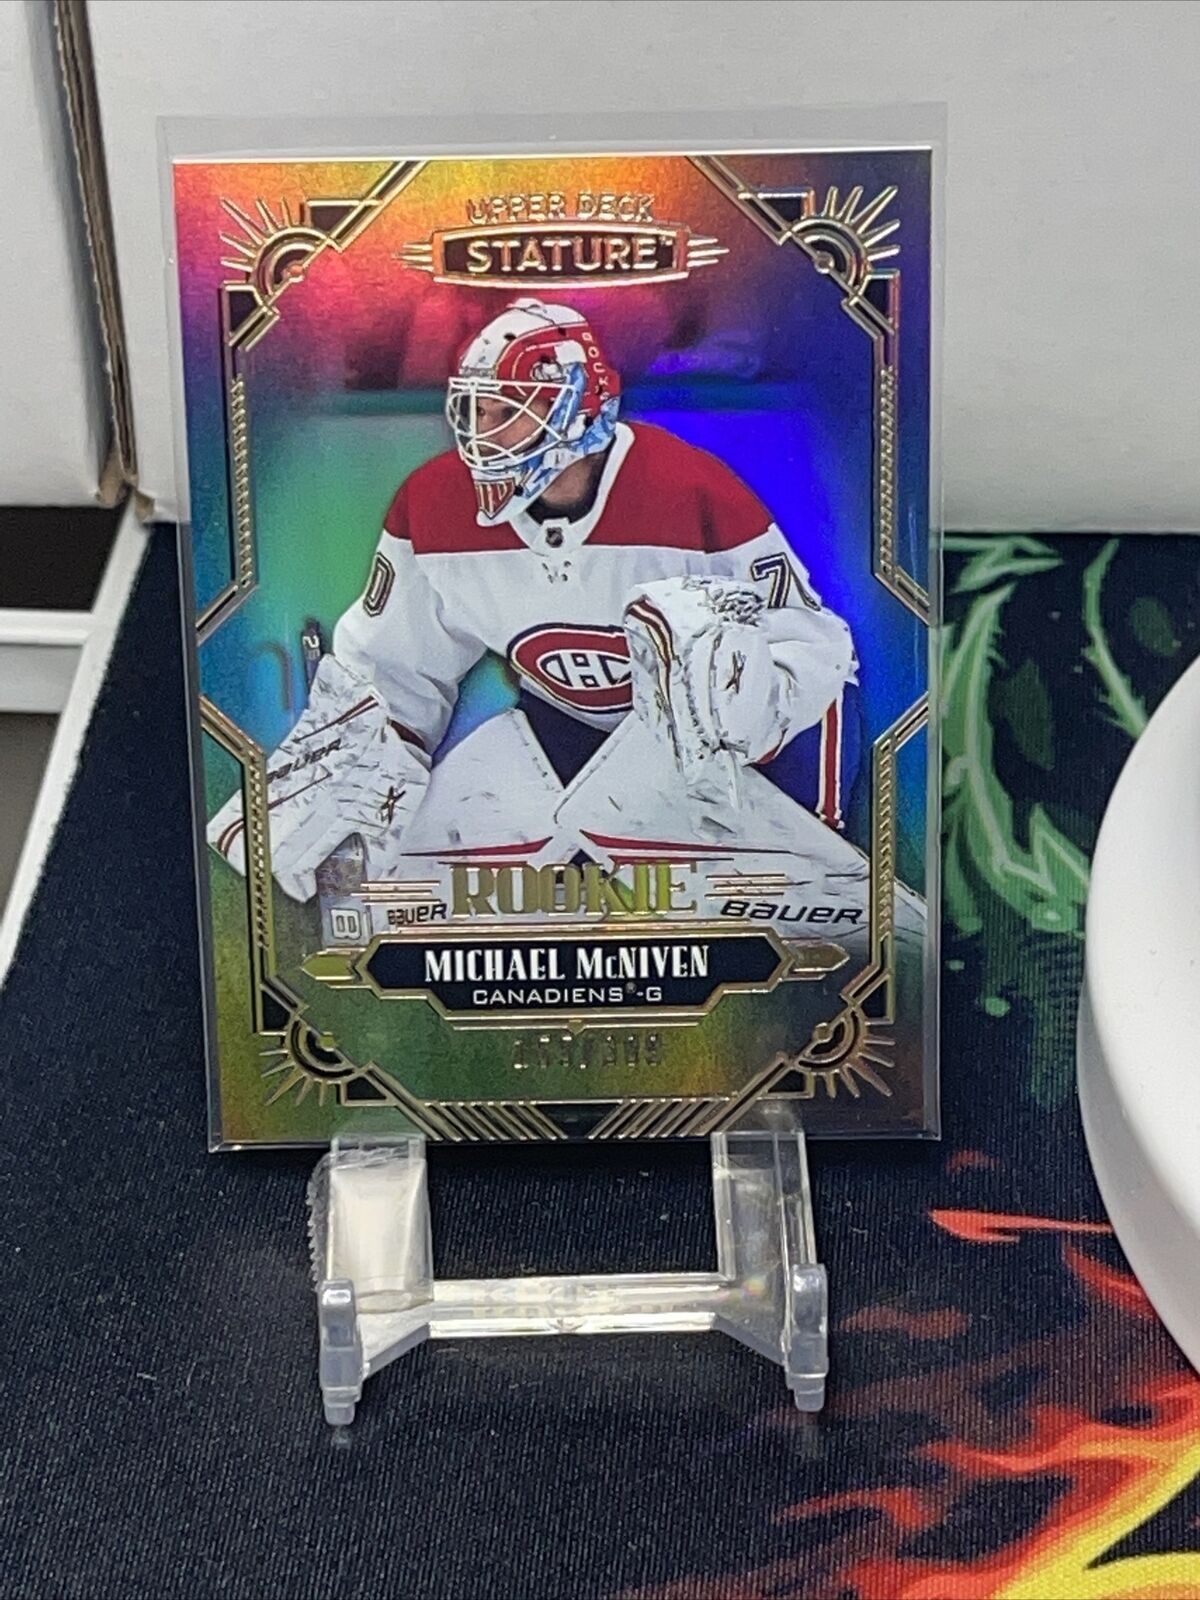 2020-21 UPPER DECK STATURE ROOKIE MICHAEL MCNIVEN 100/399 RC MONTREAL CANADIENS